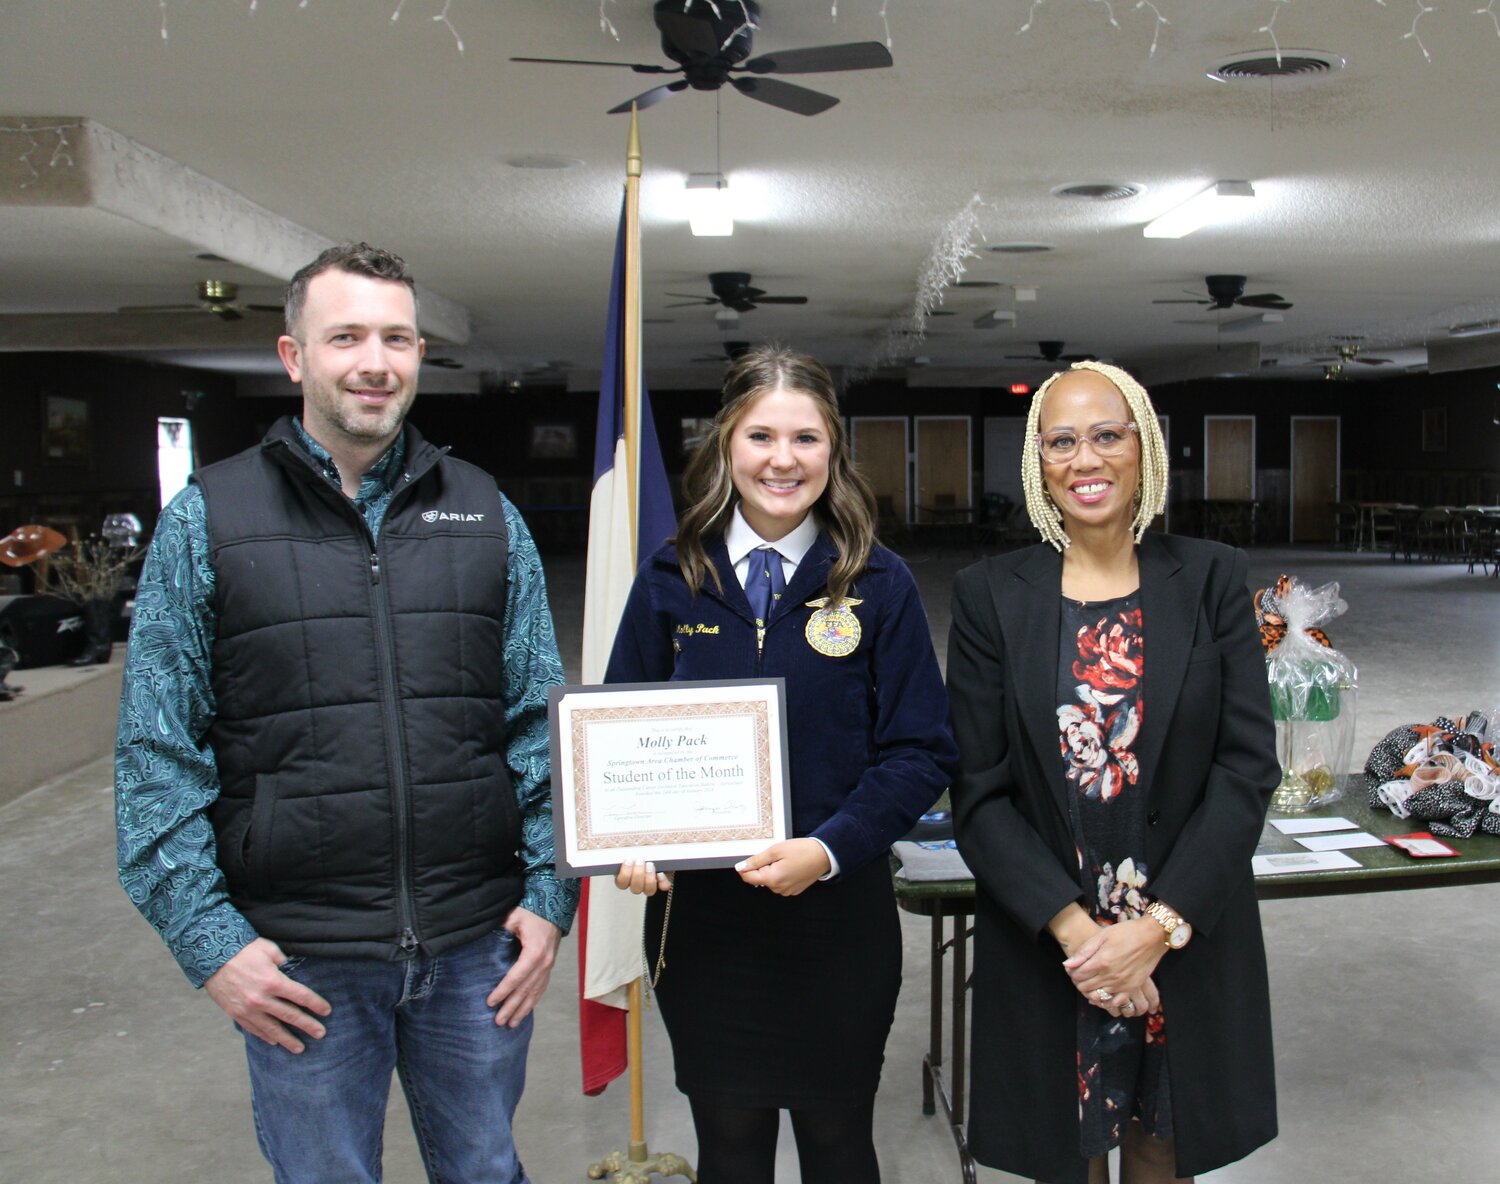 Springtown FFA Vice President Molly Pack, a senior, was also recognized as a Career and Technical Education student of the month at the Springtown Area Chamber of Commerce luncheon. She is pictured between her teacher Chance Kanode and Chamber Executive Director Terri Toone. “This is my first year with both of these students, and I've had the pleasure of watching them grow since I met them in July,” Kanode said.